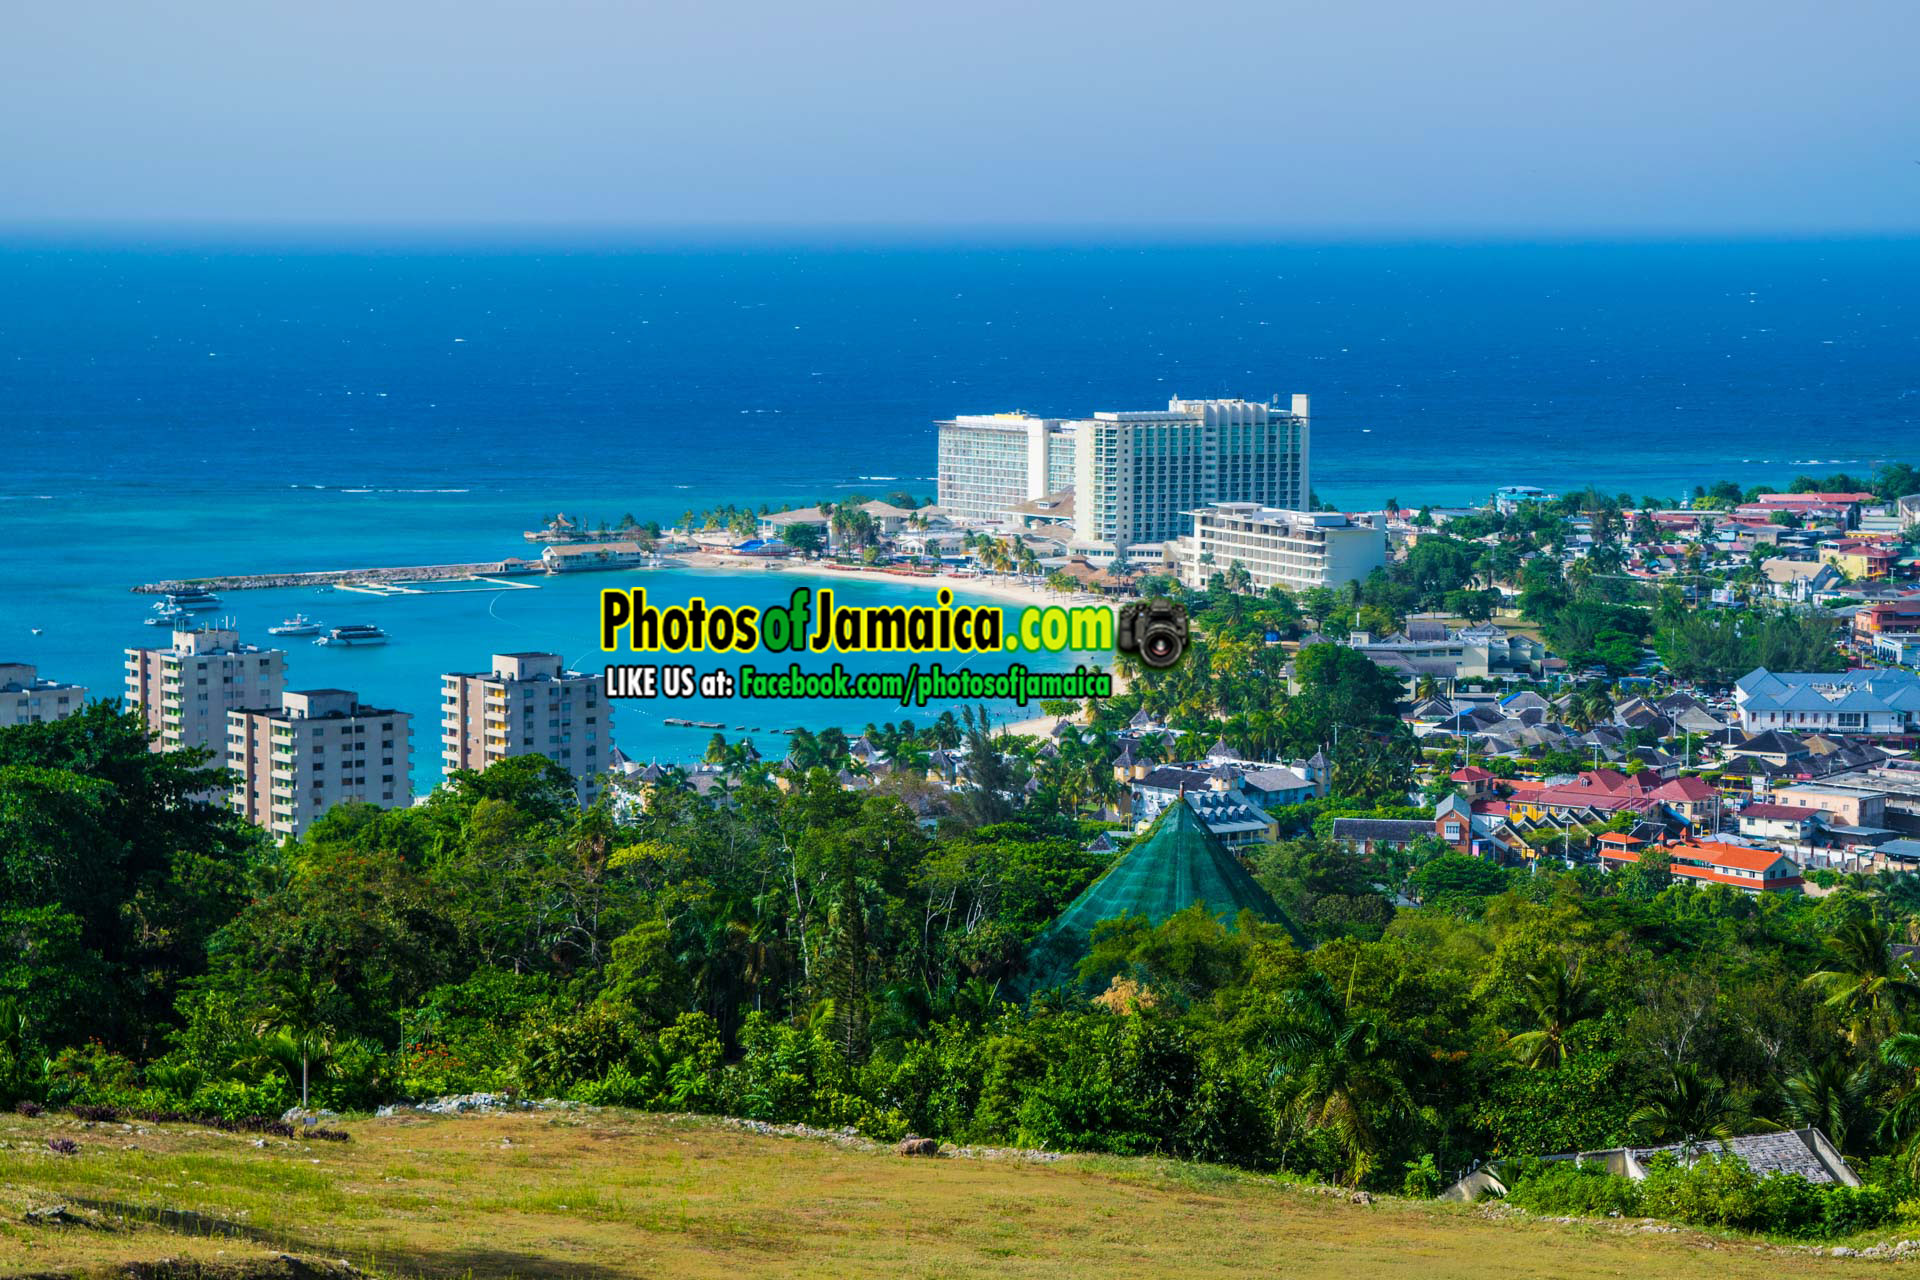 5 Reasons Why Jamaica is One of the Best Caribbean Destinations to Visit | The ...